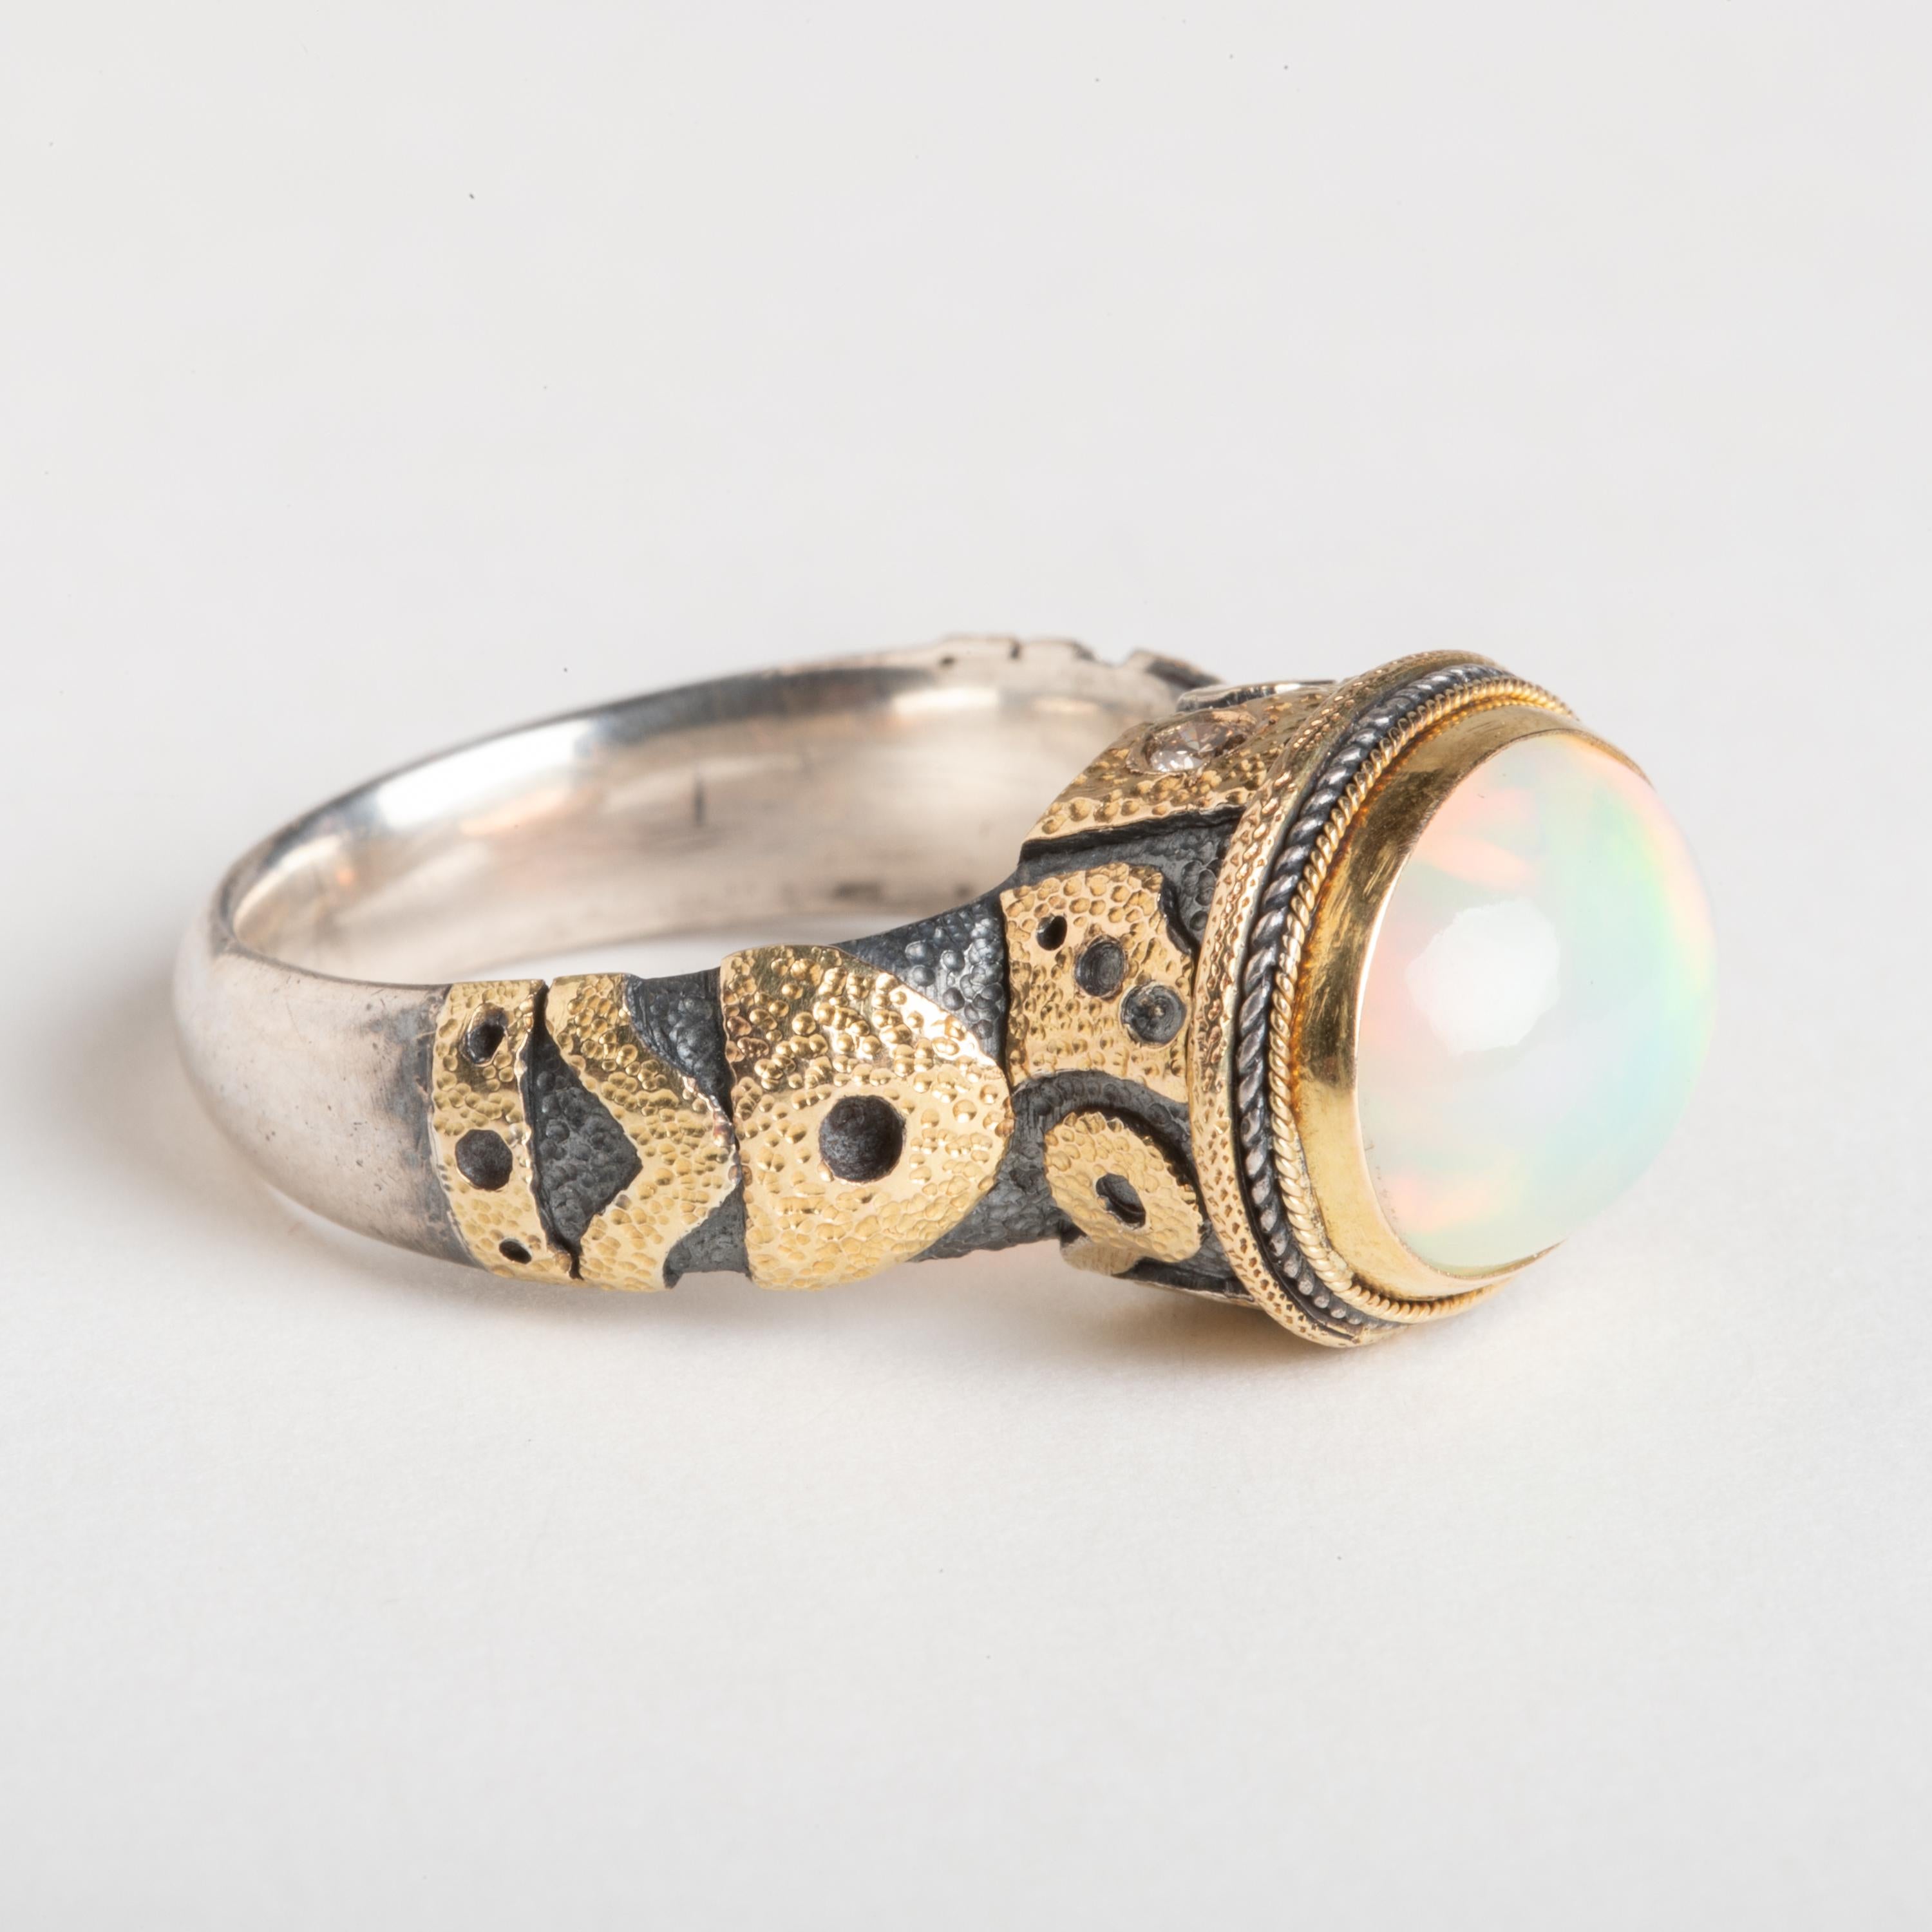 A beautiful large center opal with nice fire with two faceted round diamonds on the sides of the setting.  Set in a combination of 18K gold and sterling silver.  This is a weighted gold, not plated.  Ring size is 6.75.  Carat weight of opal is 2.88.